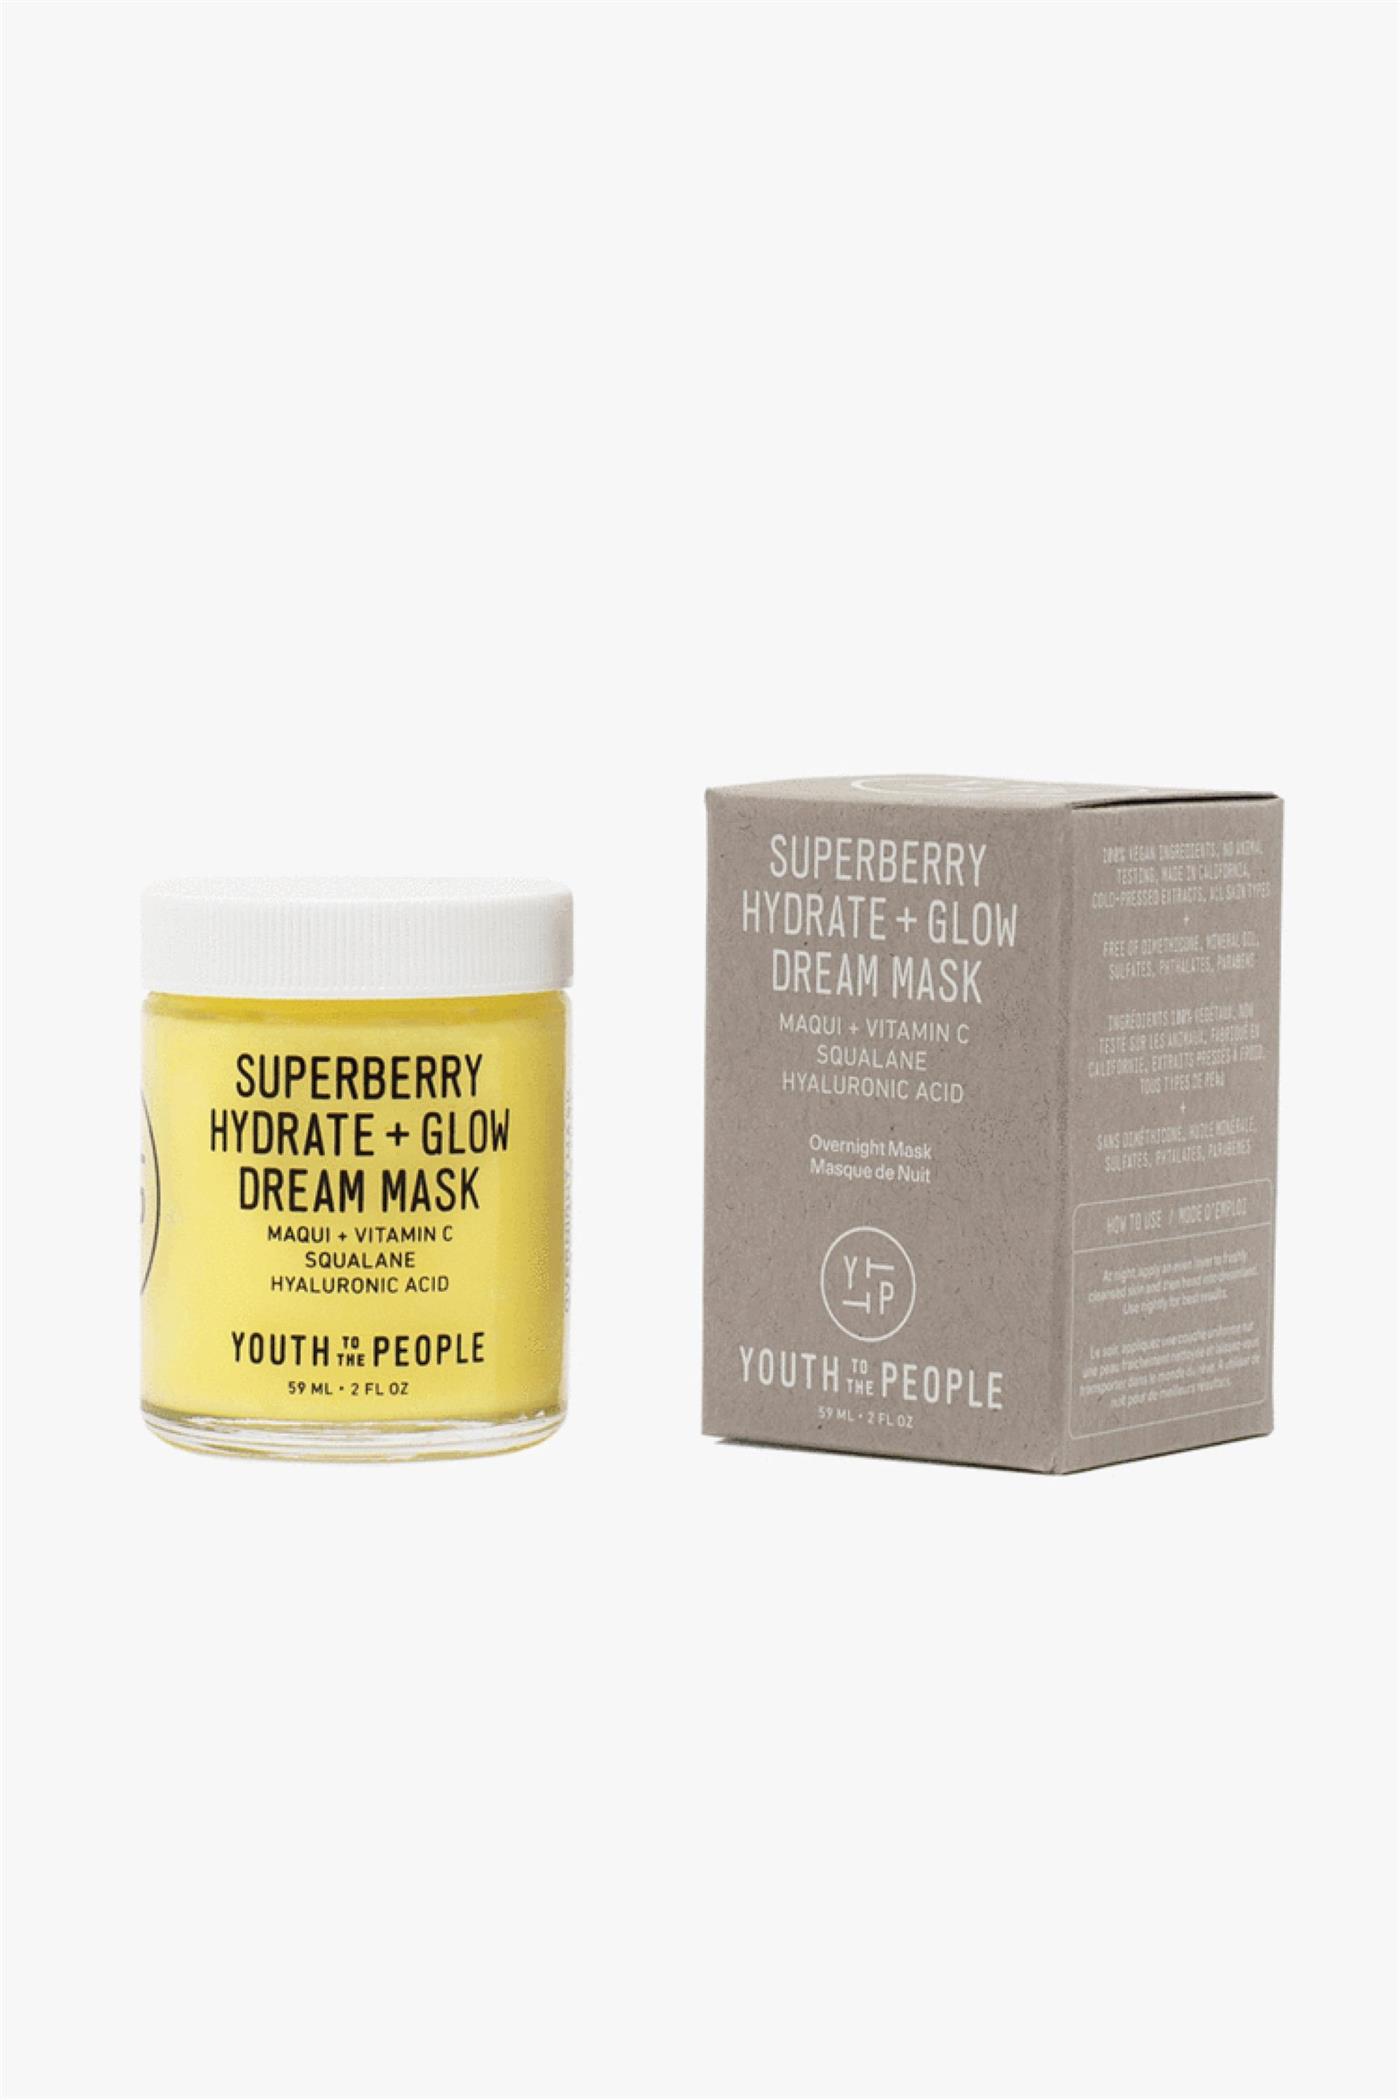 sephora compras9. YOUTH TO THE PEOPLE Superberry Hydrate Glow Dream Mask Mascarilla de noche